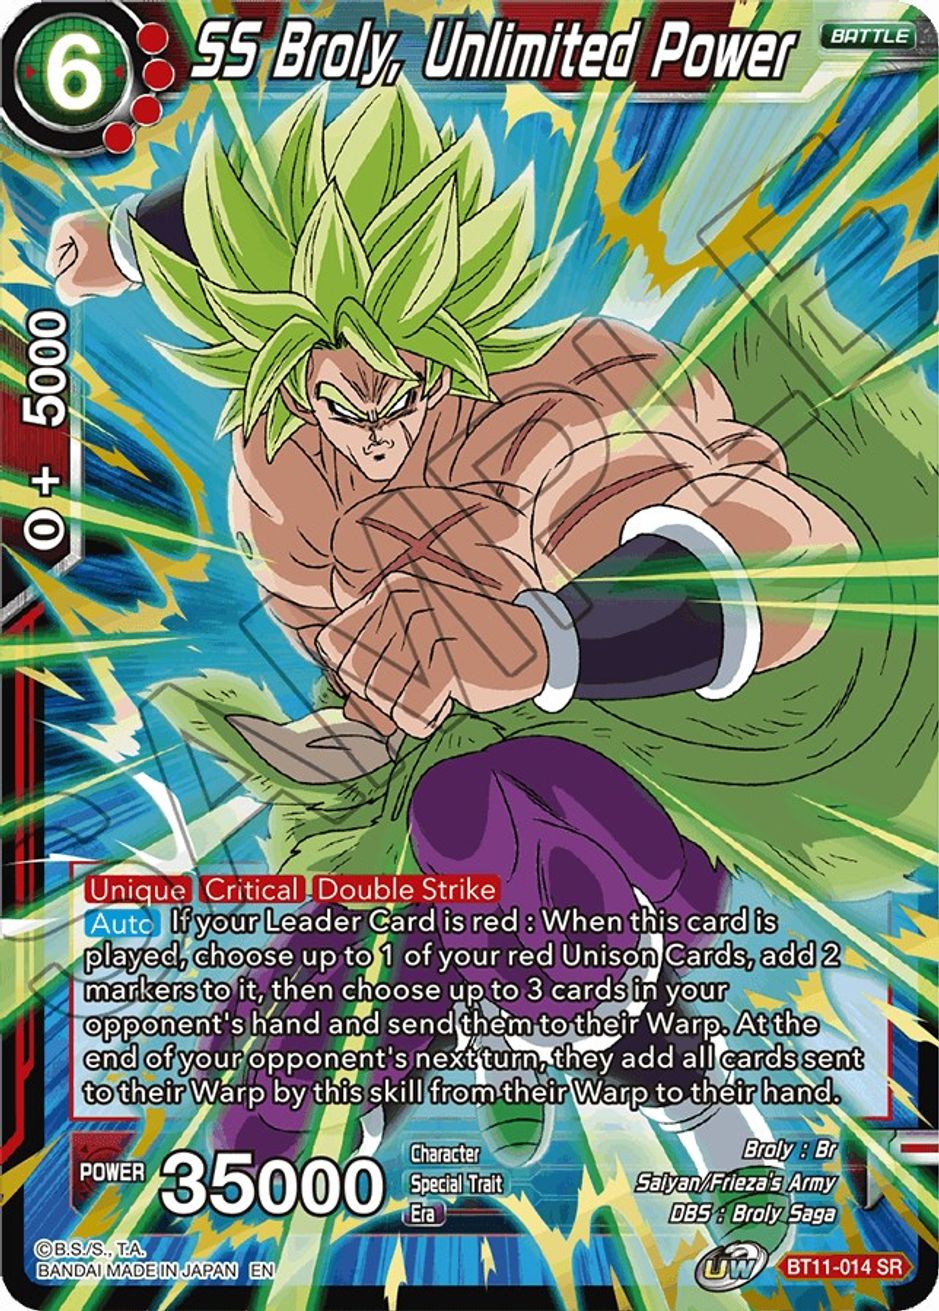 SS Broly, Unlimited Power - Vermilion Bloodline - Dragon Ball Super ...